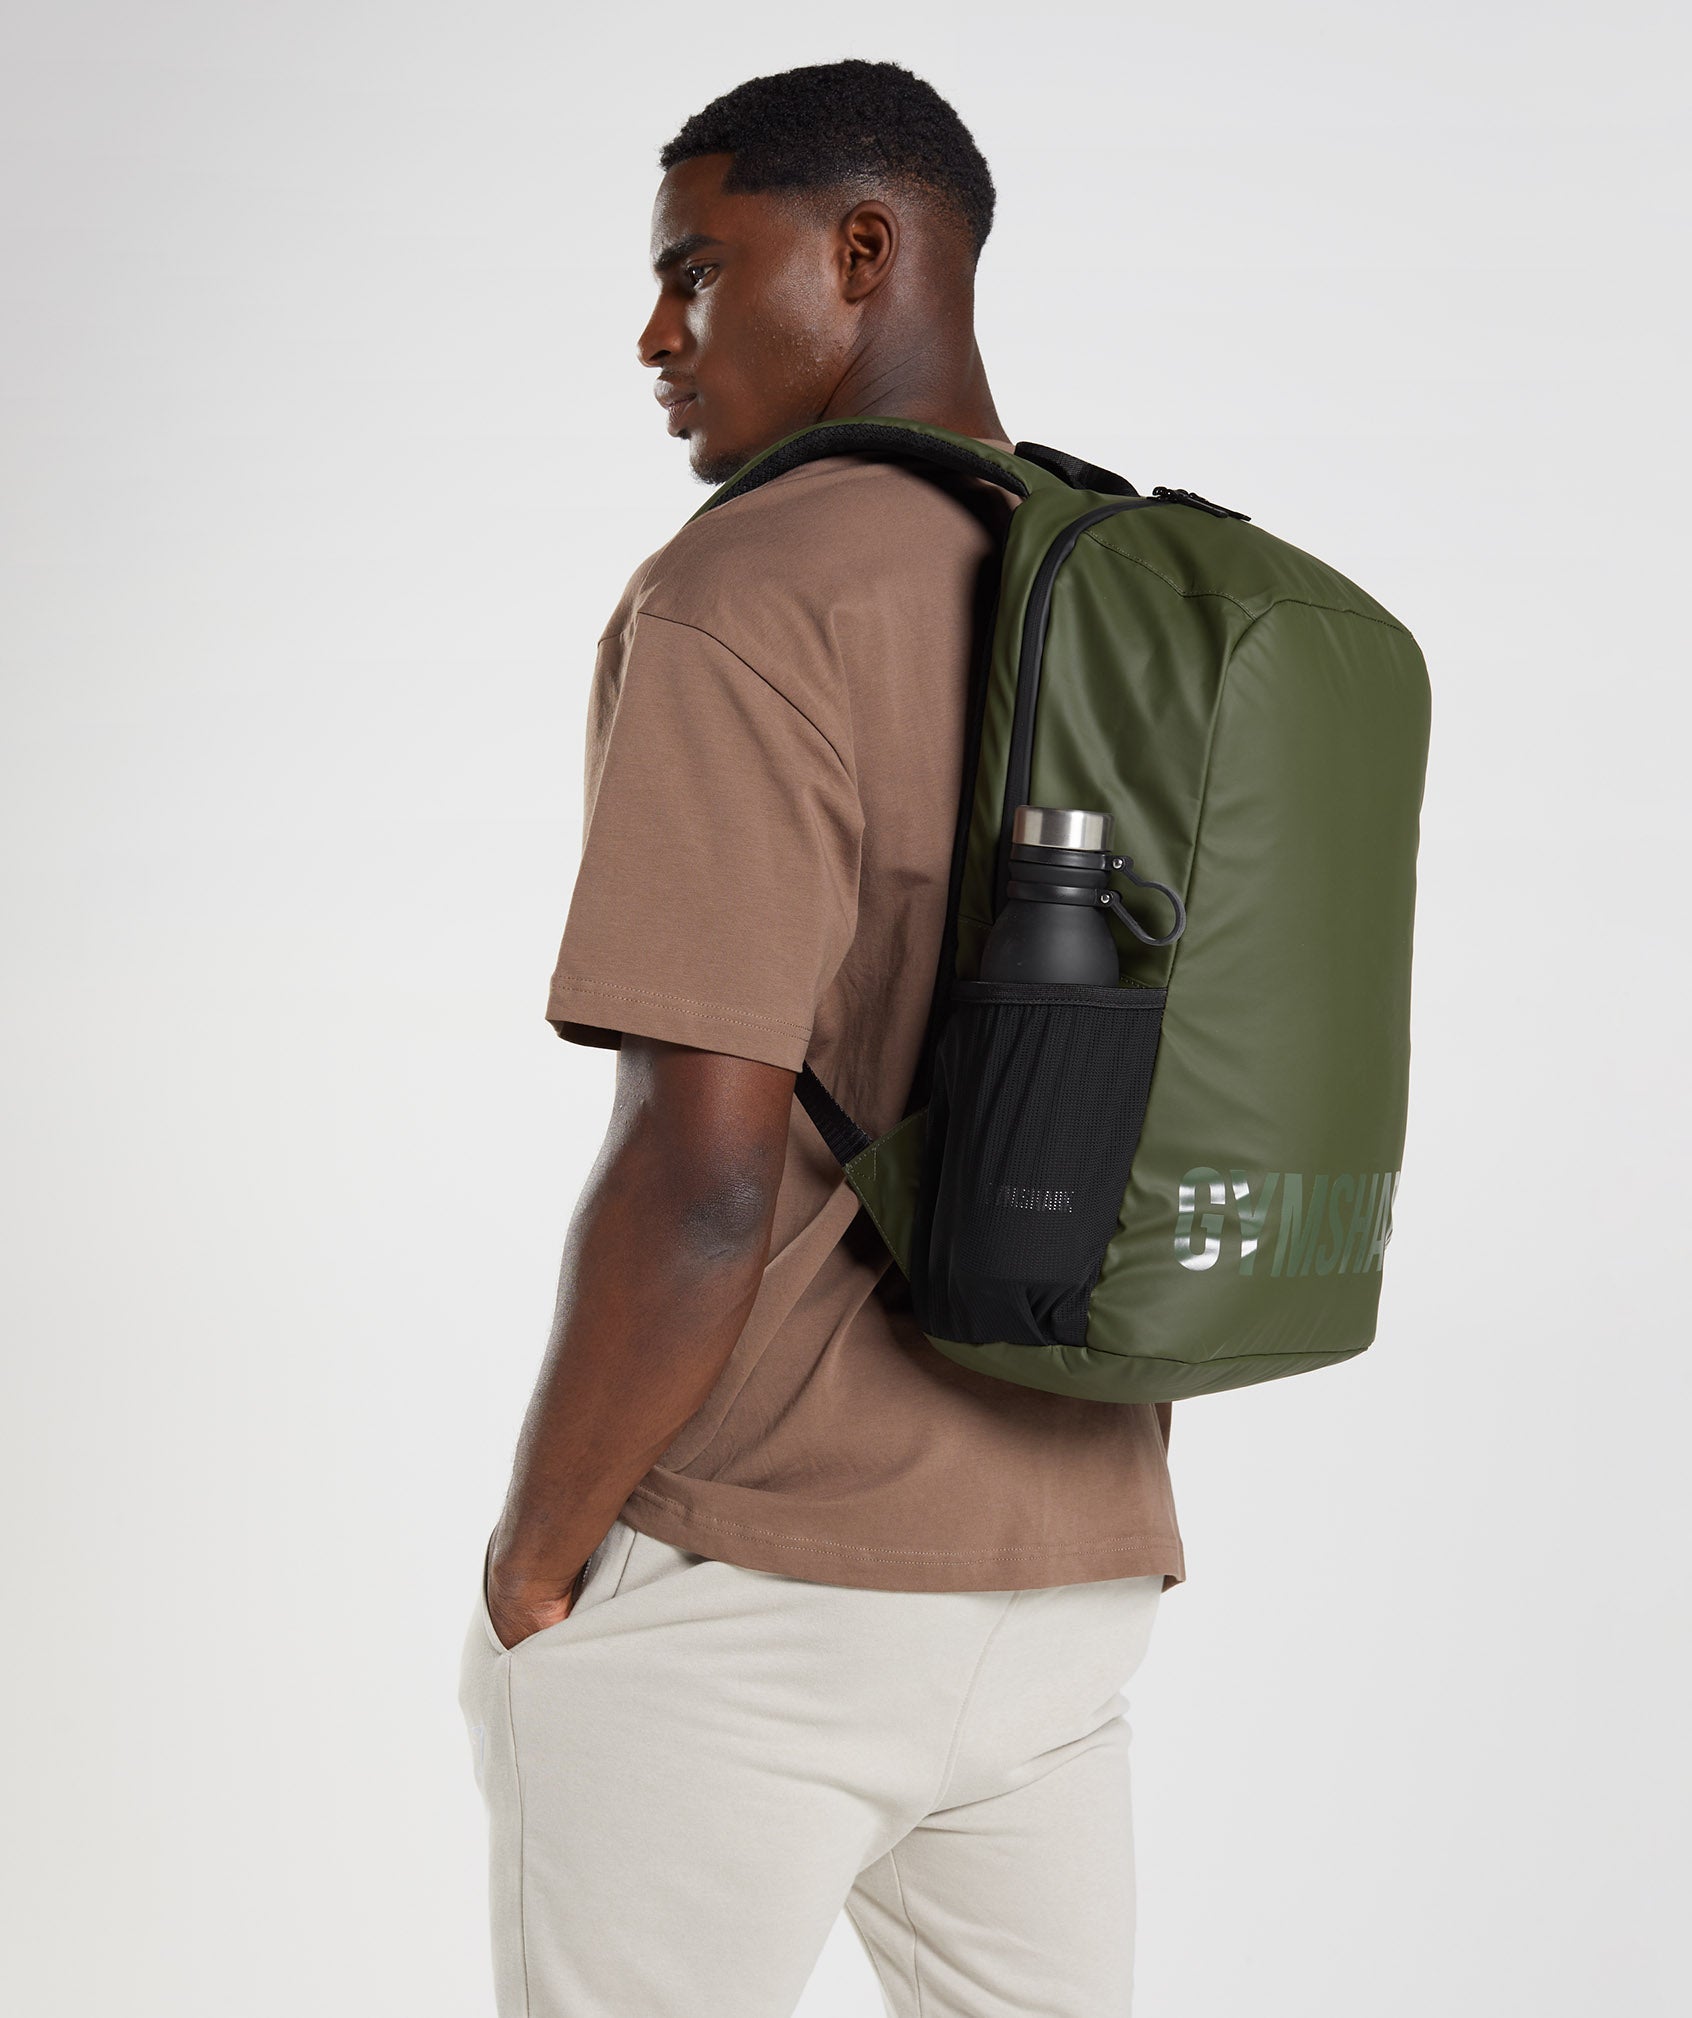 X-Series Bag 0.1 in Core Olive - view 3